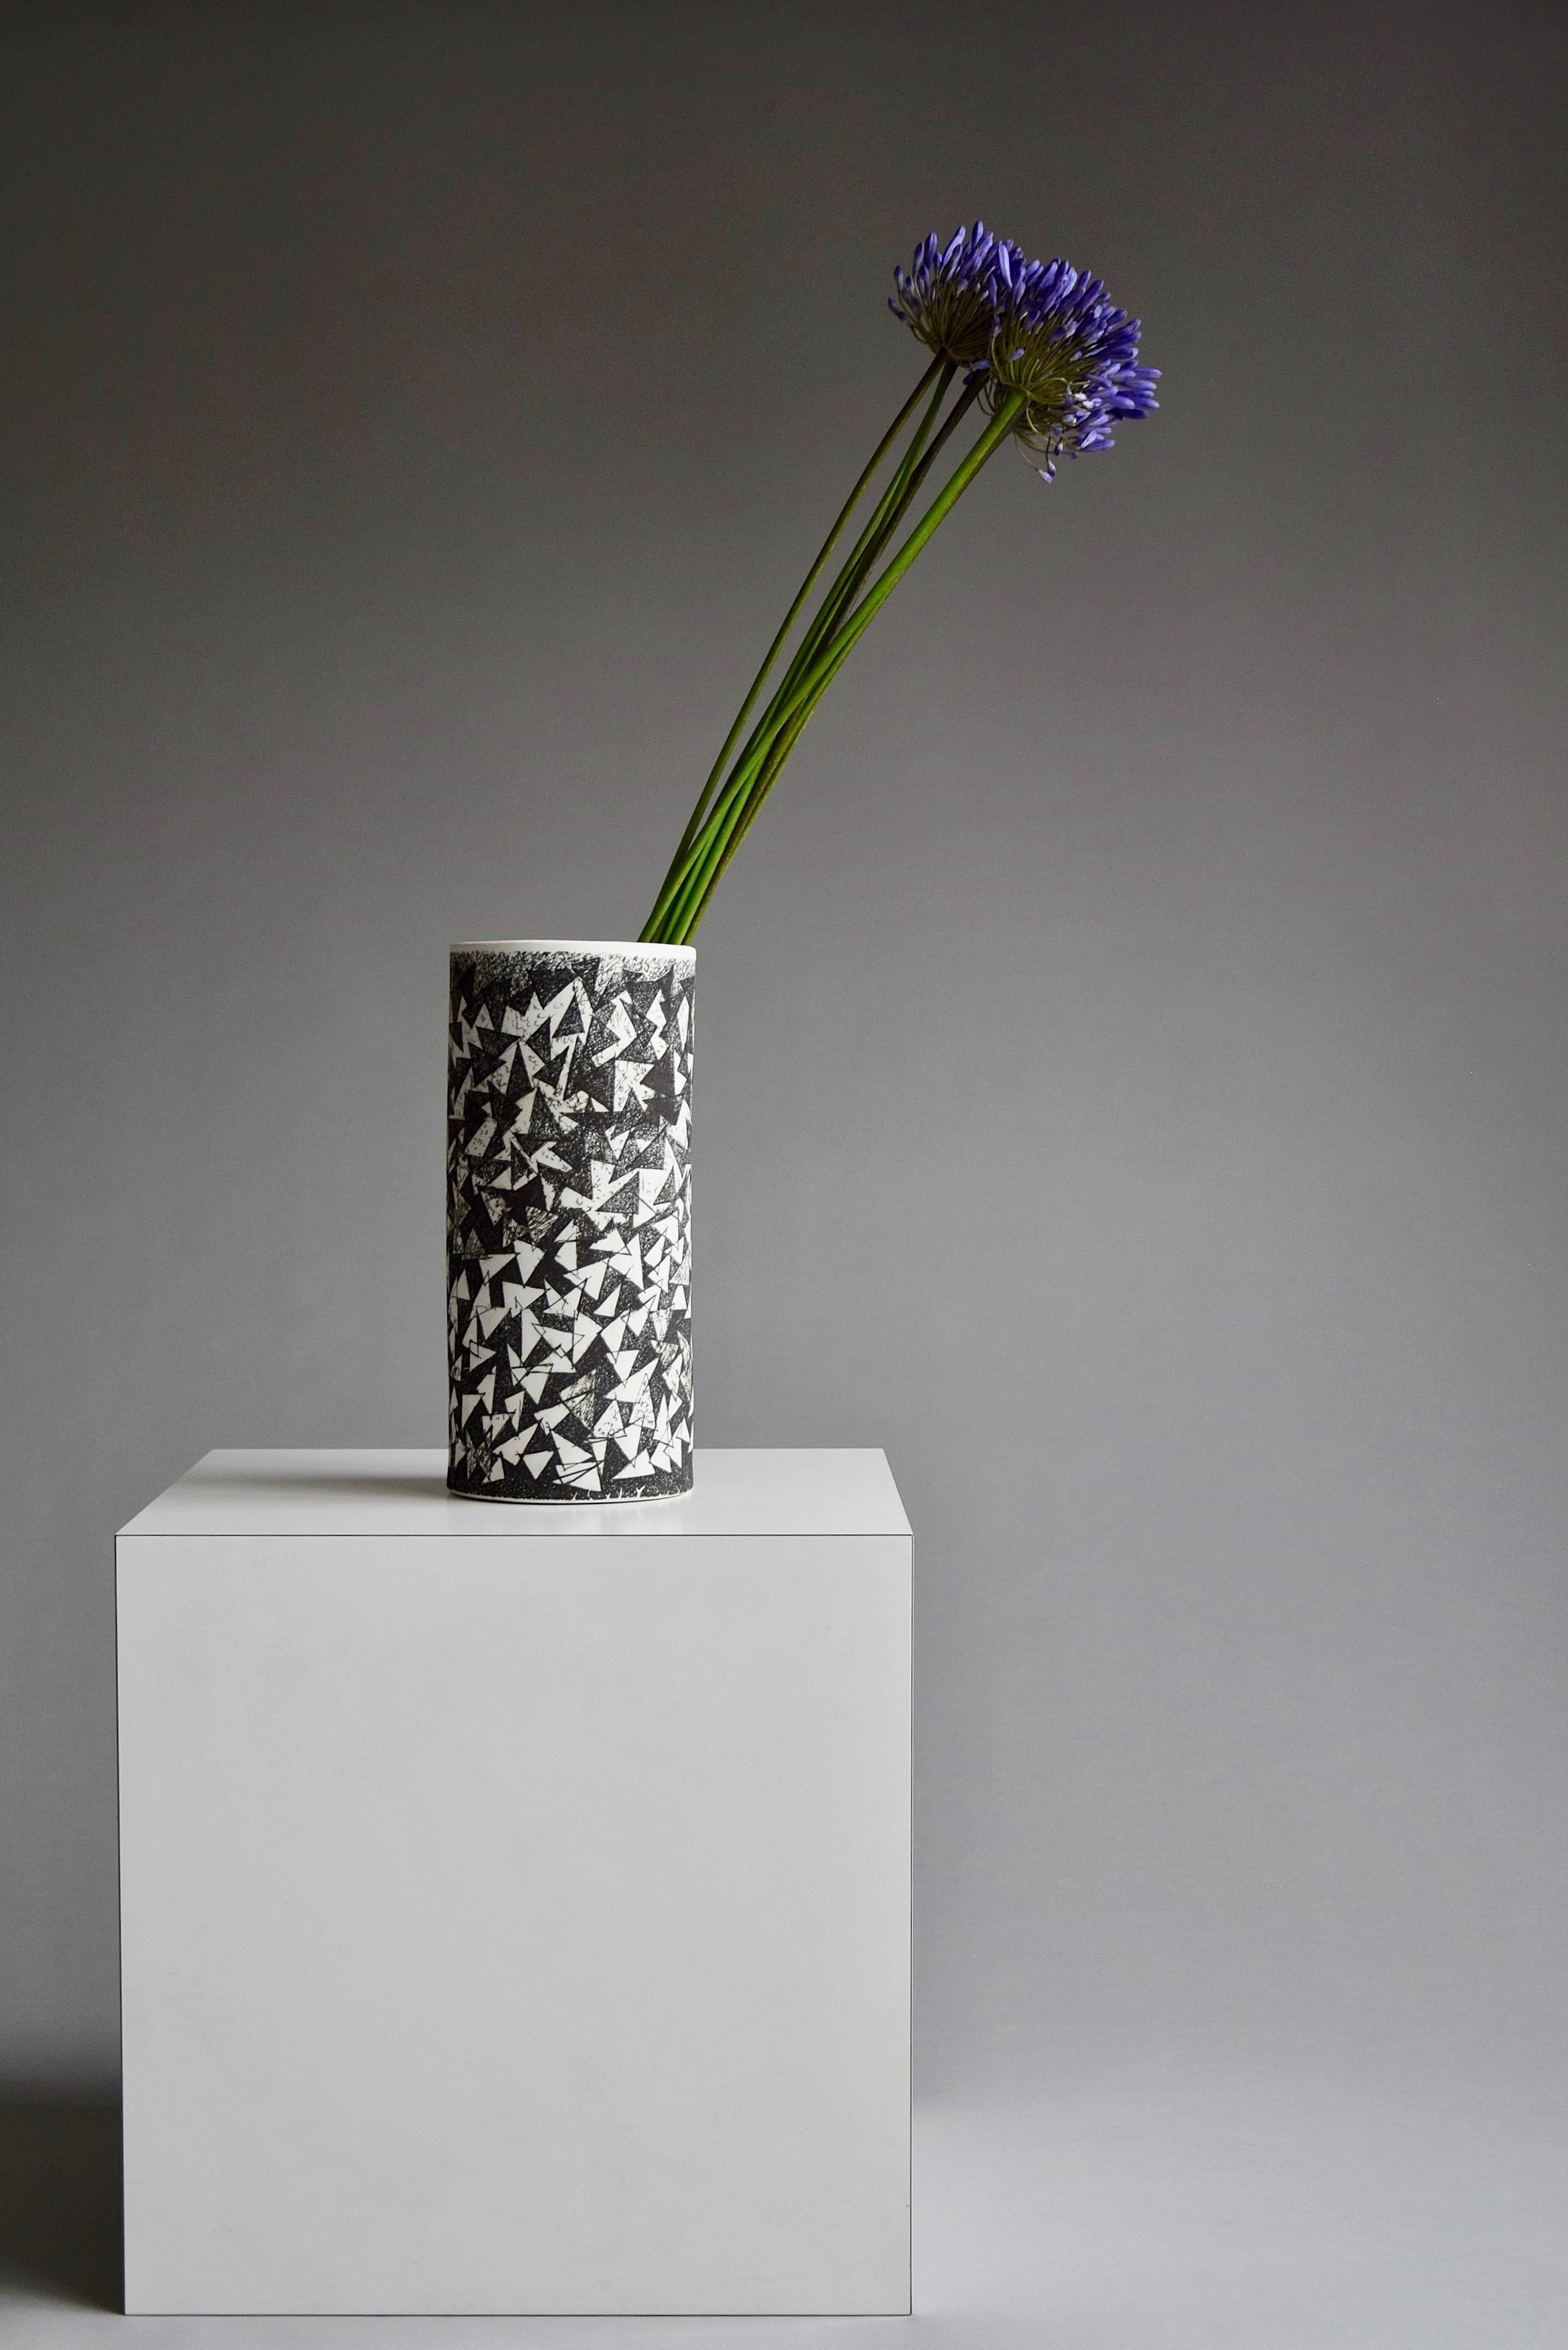 Beautiful black and white post modern signed ceramic vase by Mik Becka. 
Mik Becka has a series of iconic buildings to his name at the age of 80.
He built a number of community houses, the 'Bosjes van Zanen' luxury apartments, the banking building